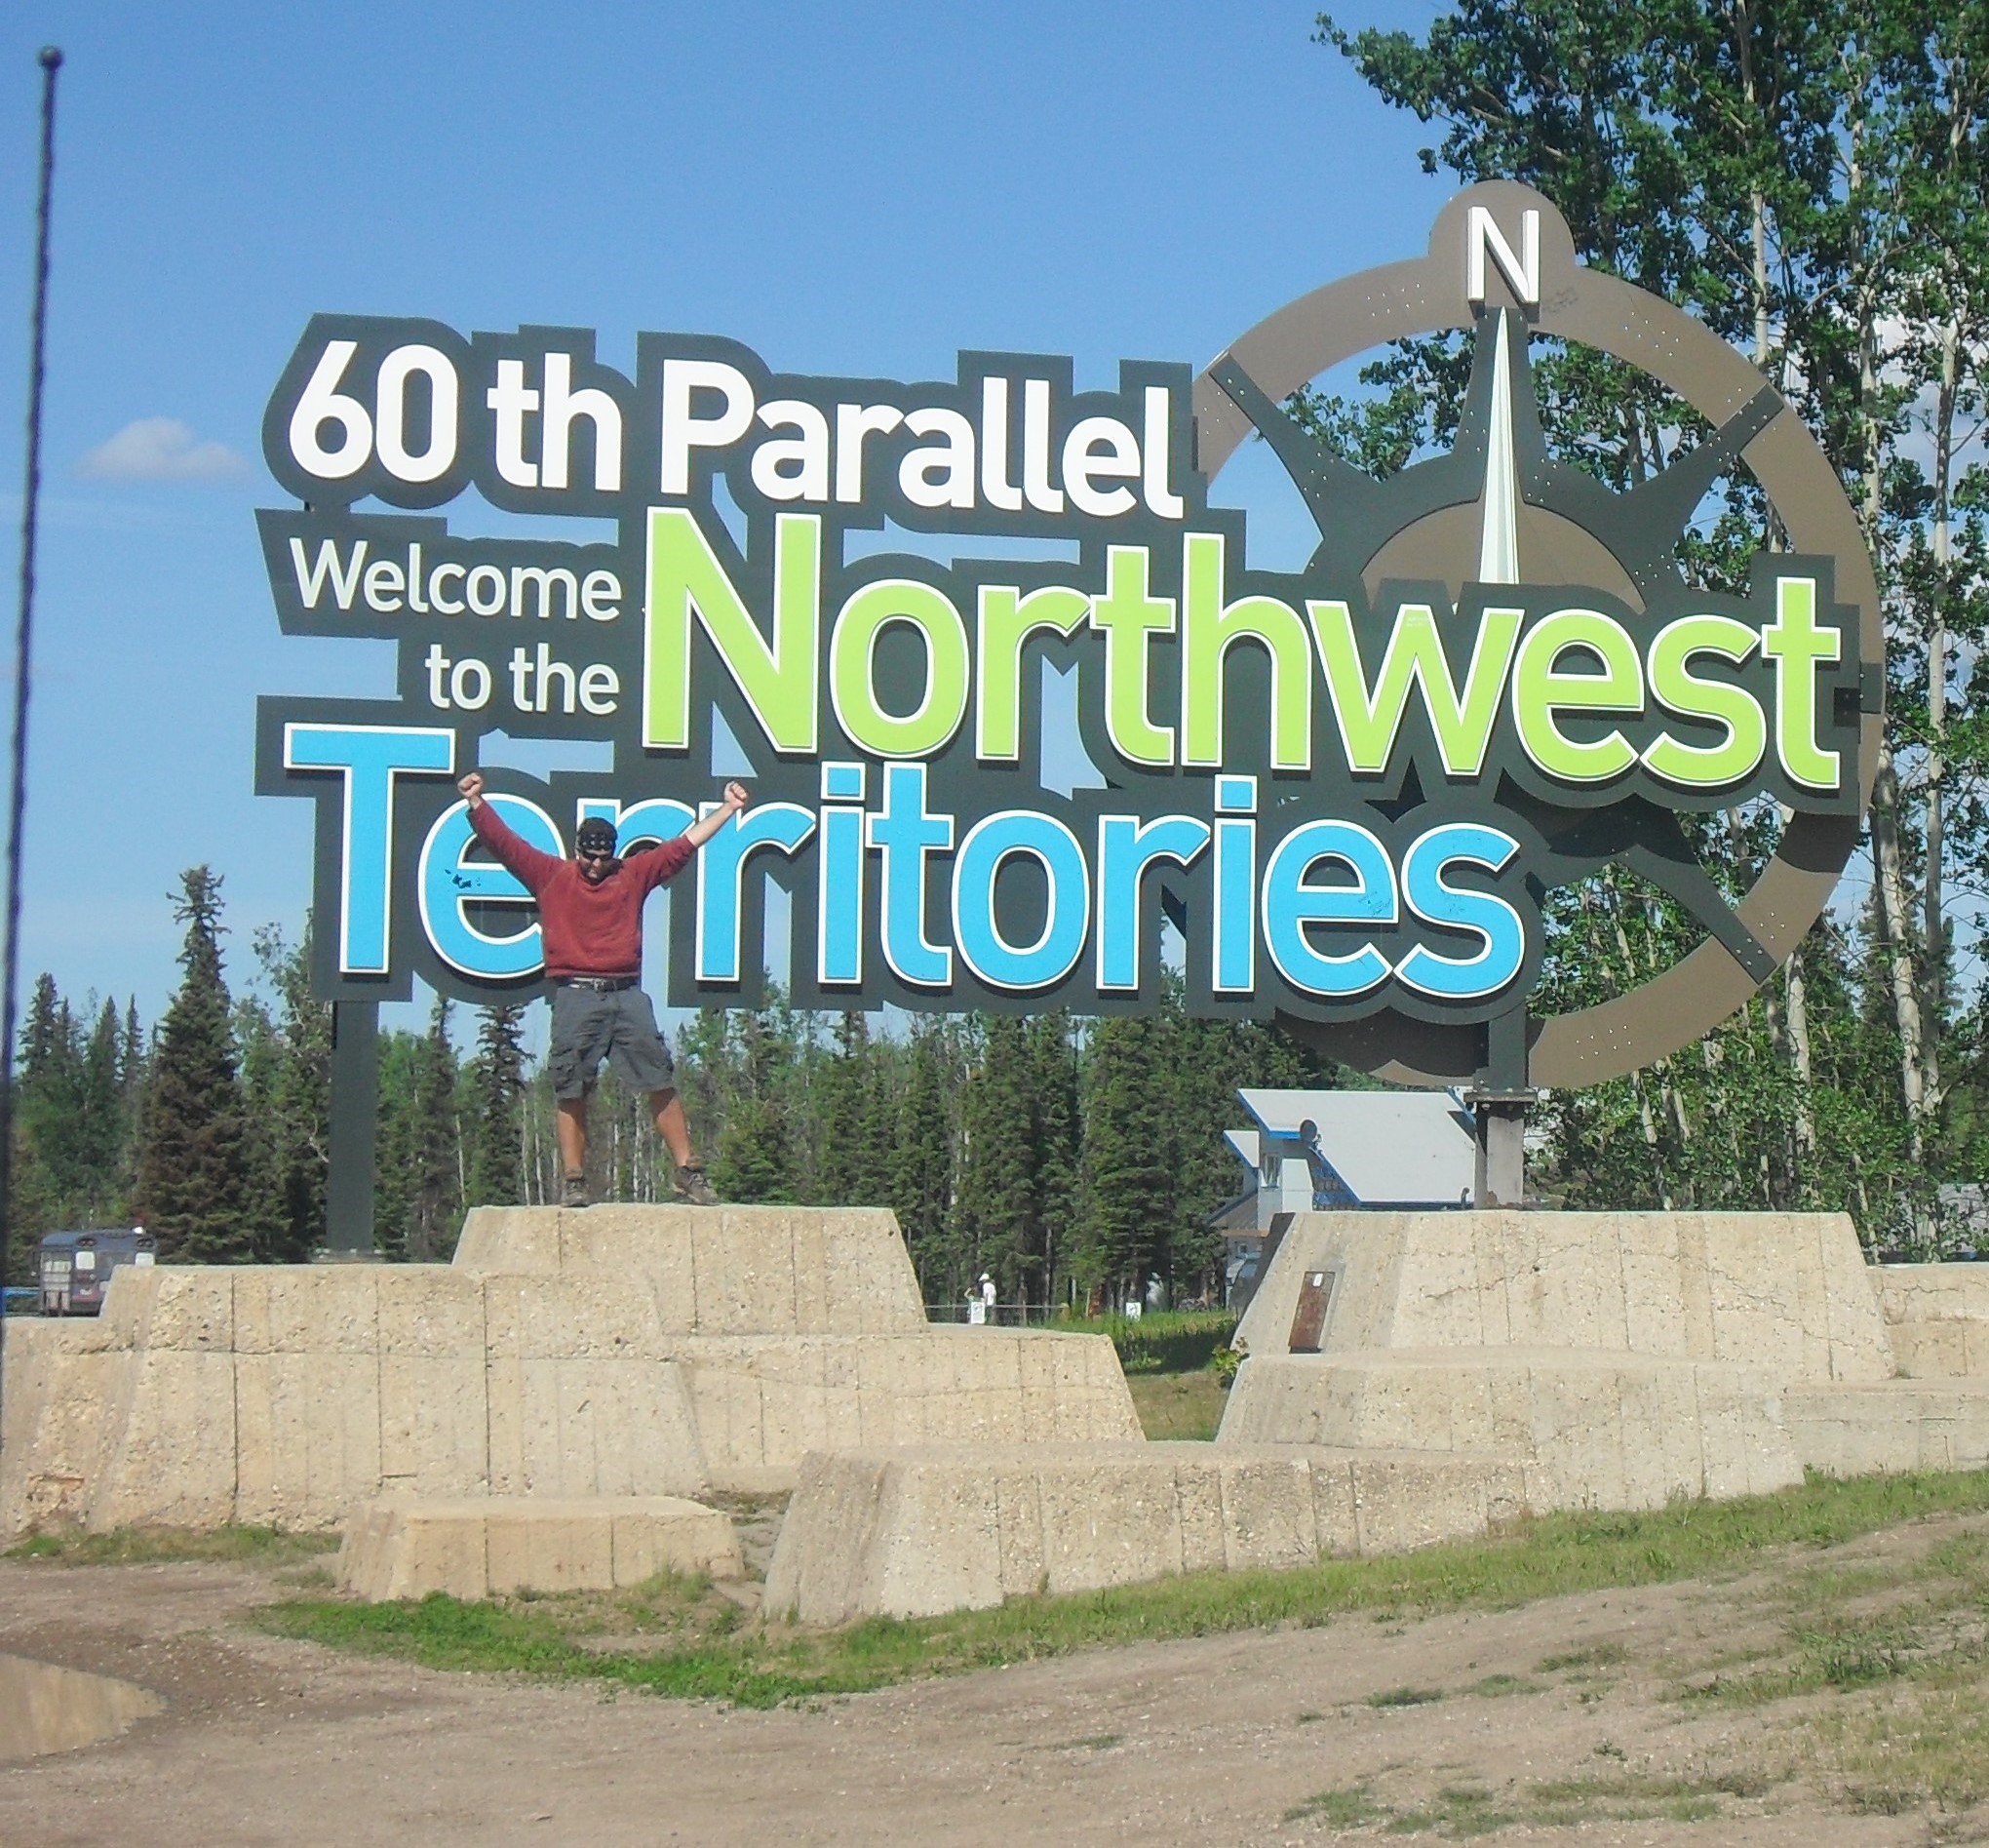 Erik stops at the welcome sign for Canada’s Northwest Territories on his way up to Great Slave Lake.